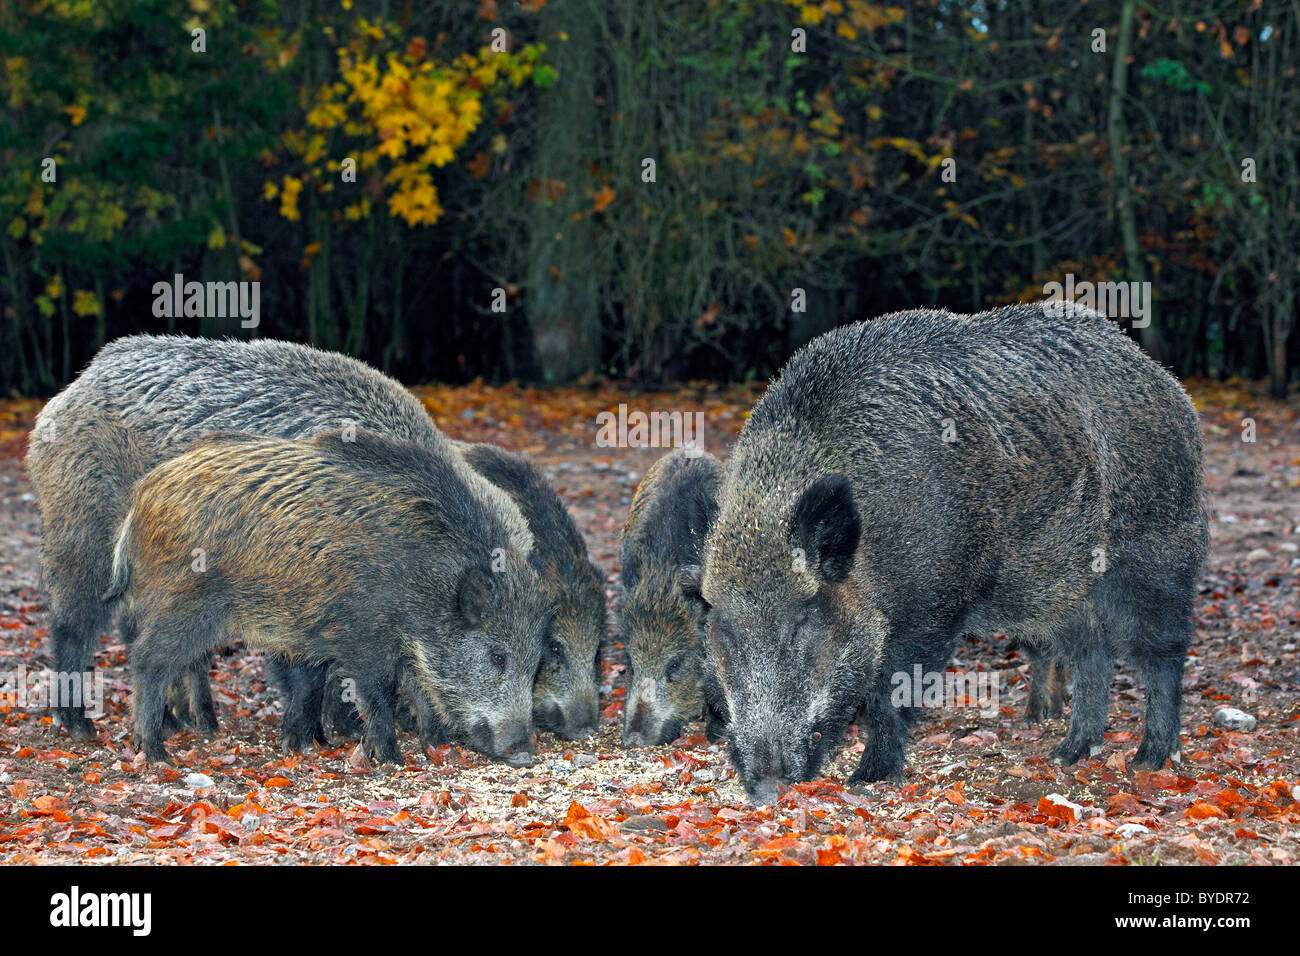 A sounder of wild boars (Sus scrofa), in autumn Stock Photo